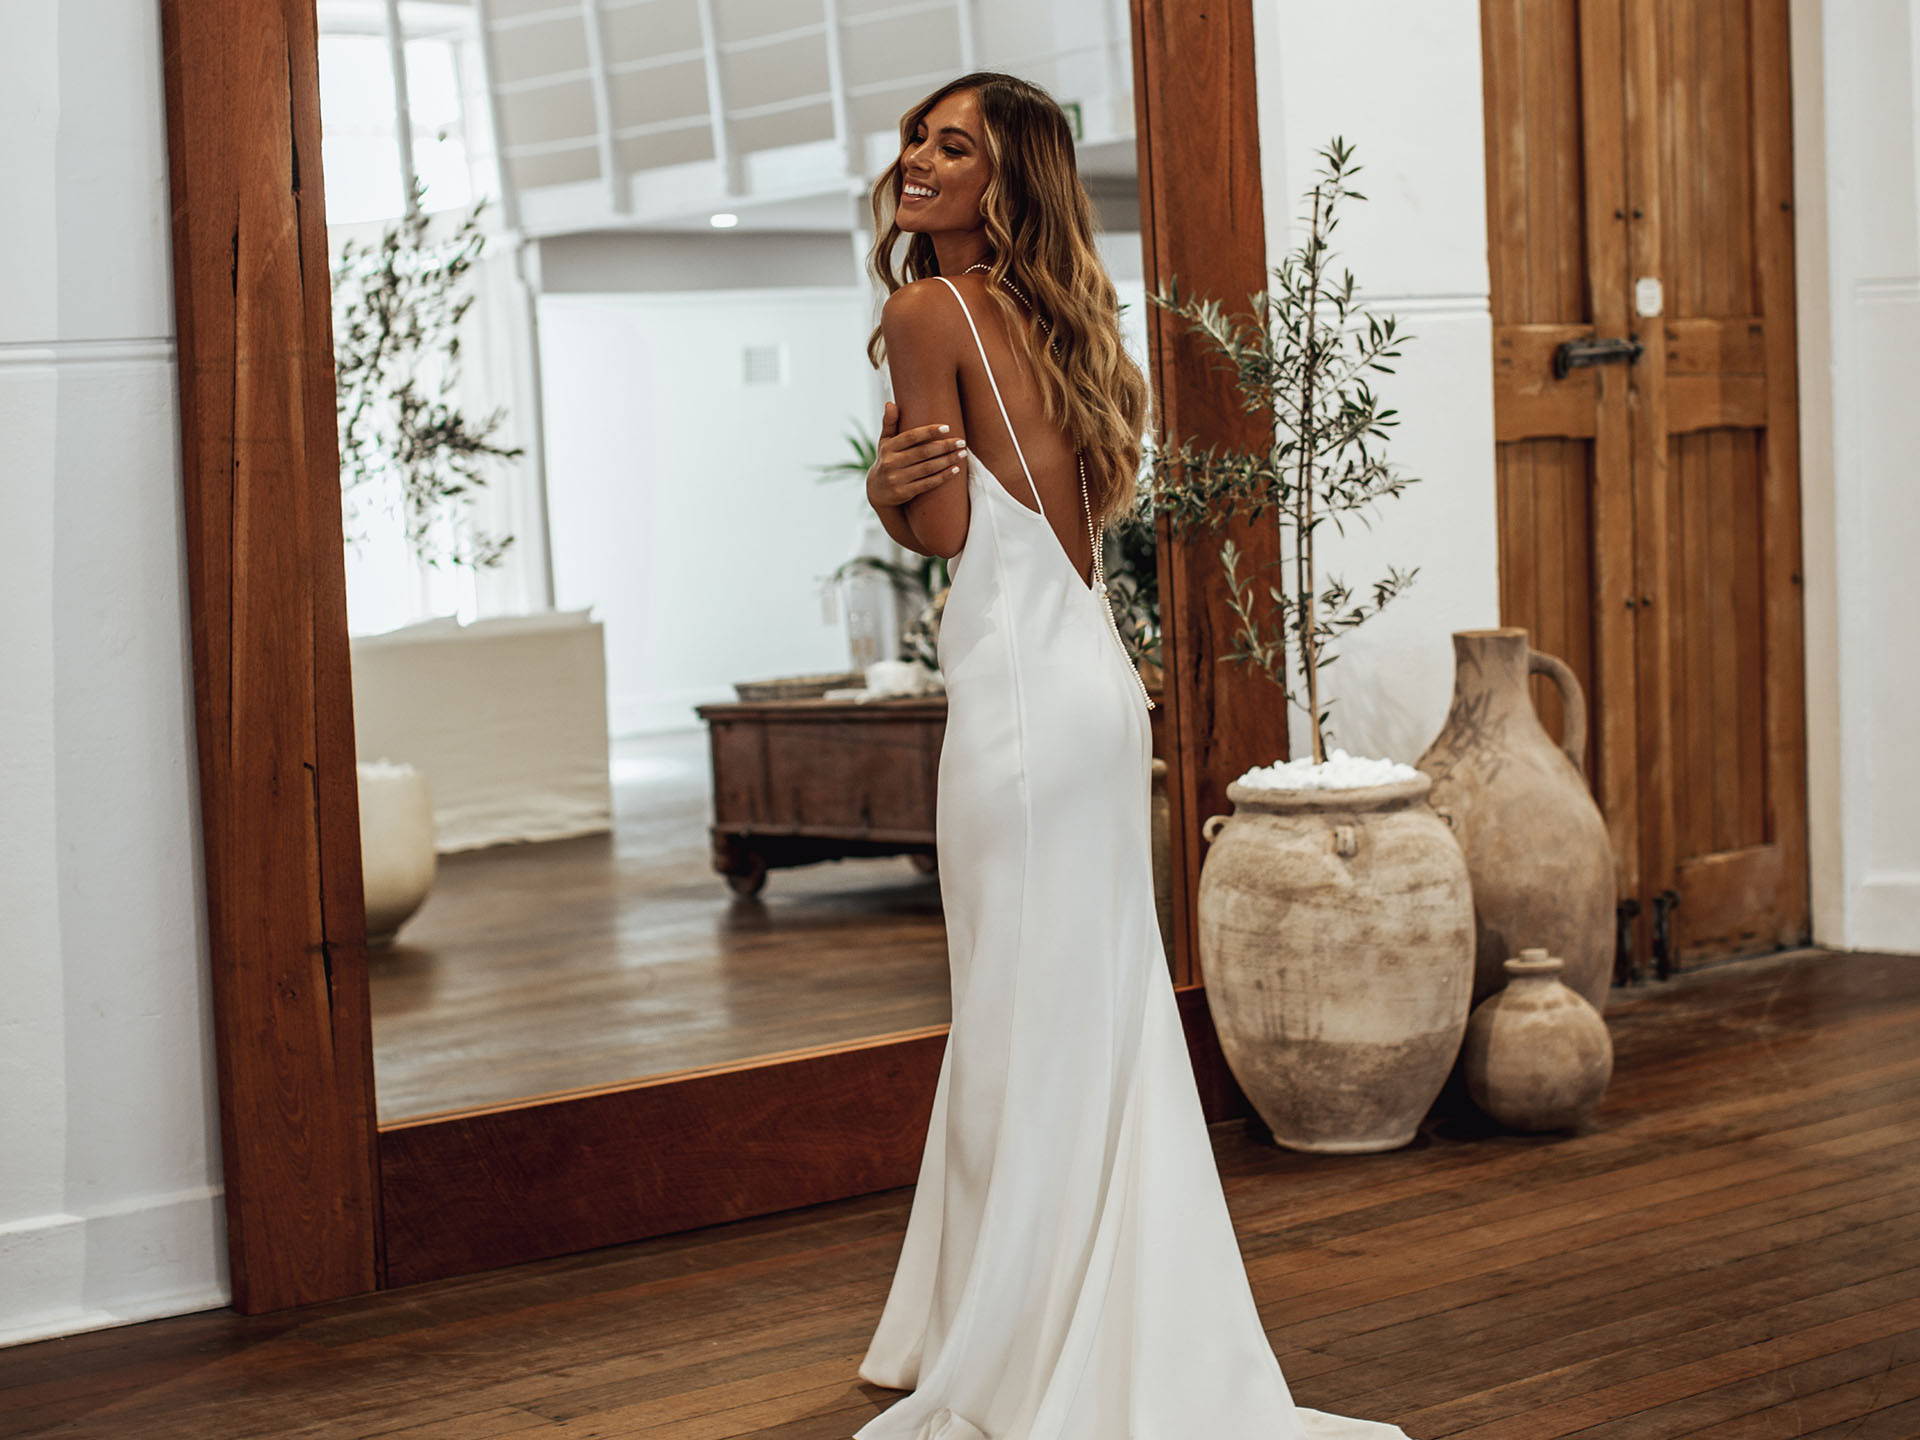 Bride wearing the Grace Loves Lace Summer silk gown with rustic ceramics and large timber mirror